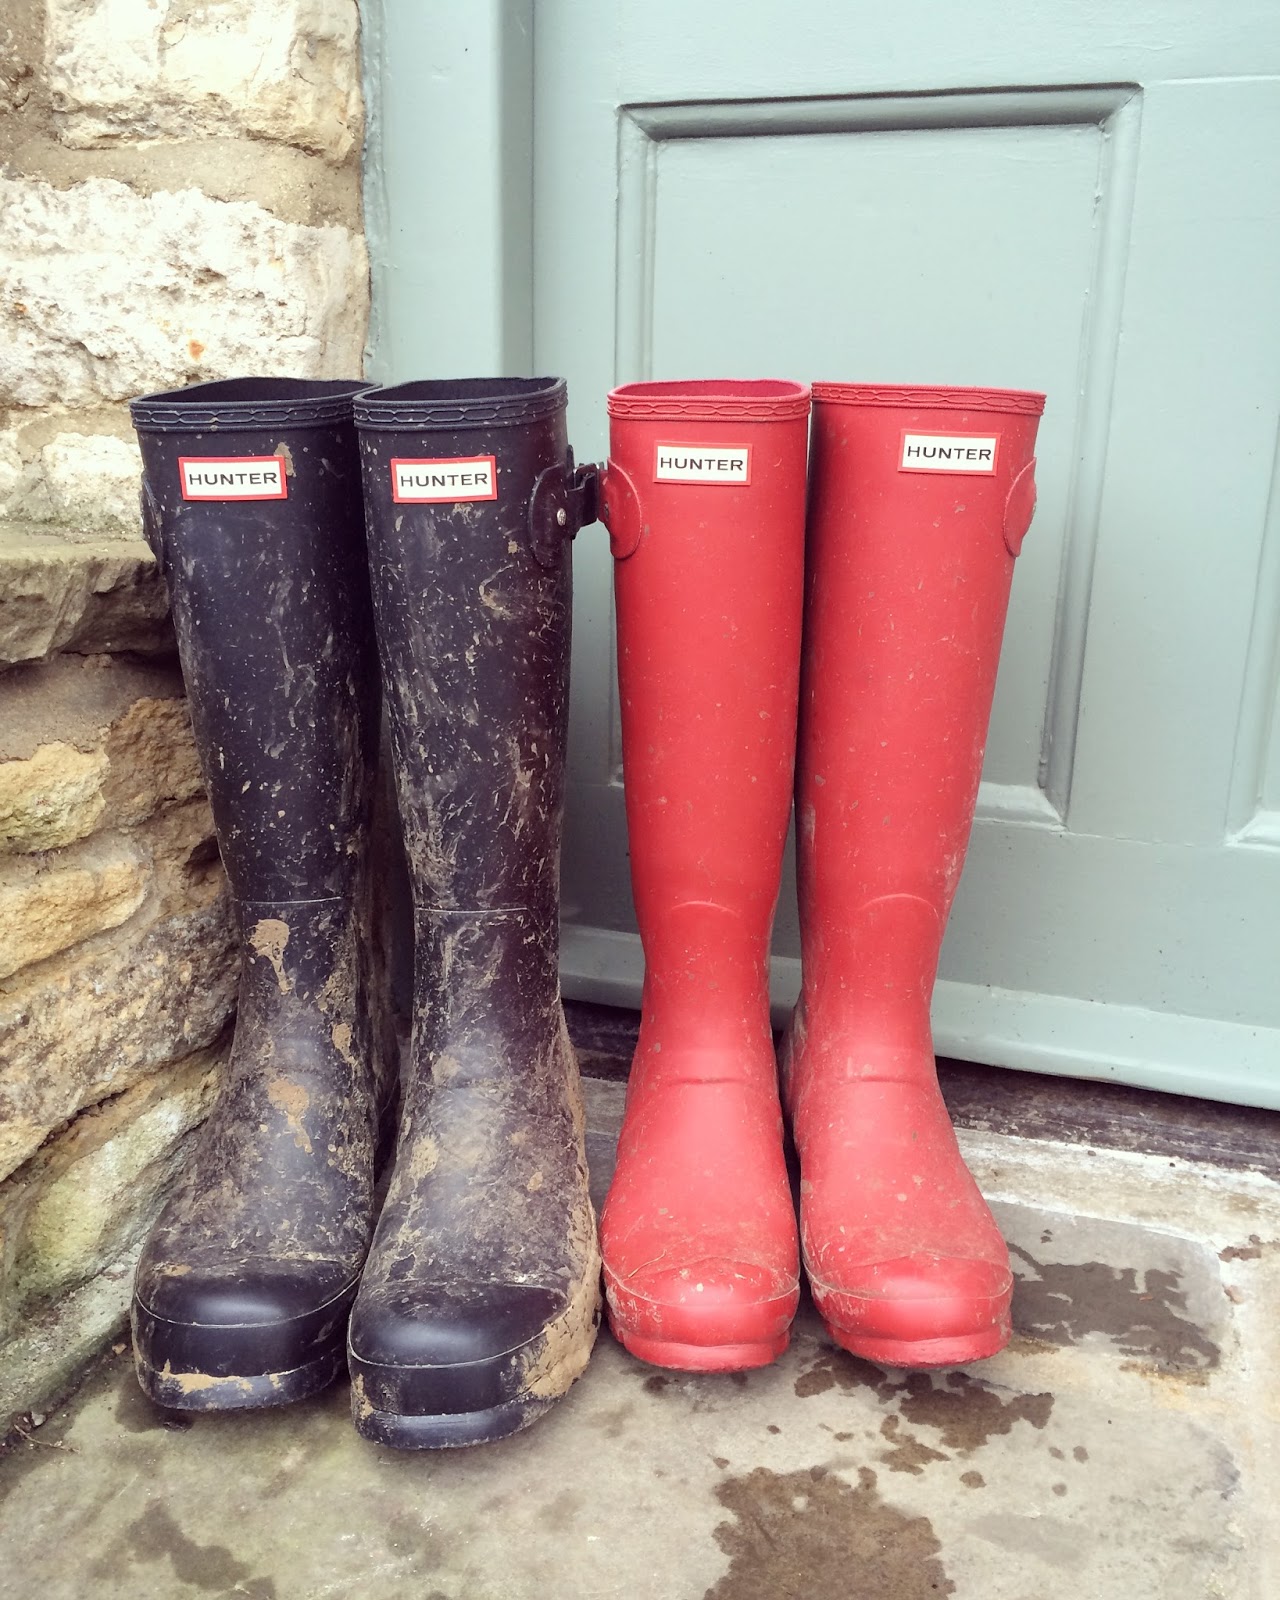 Travel - Our Week in The Cotswolds {Part 2} - Roses and Rolltops